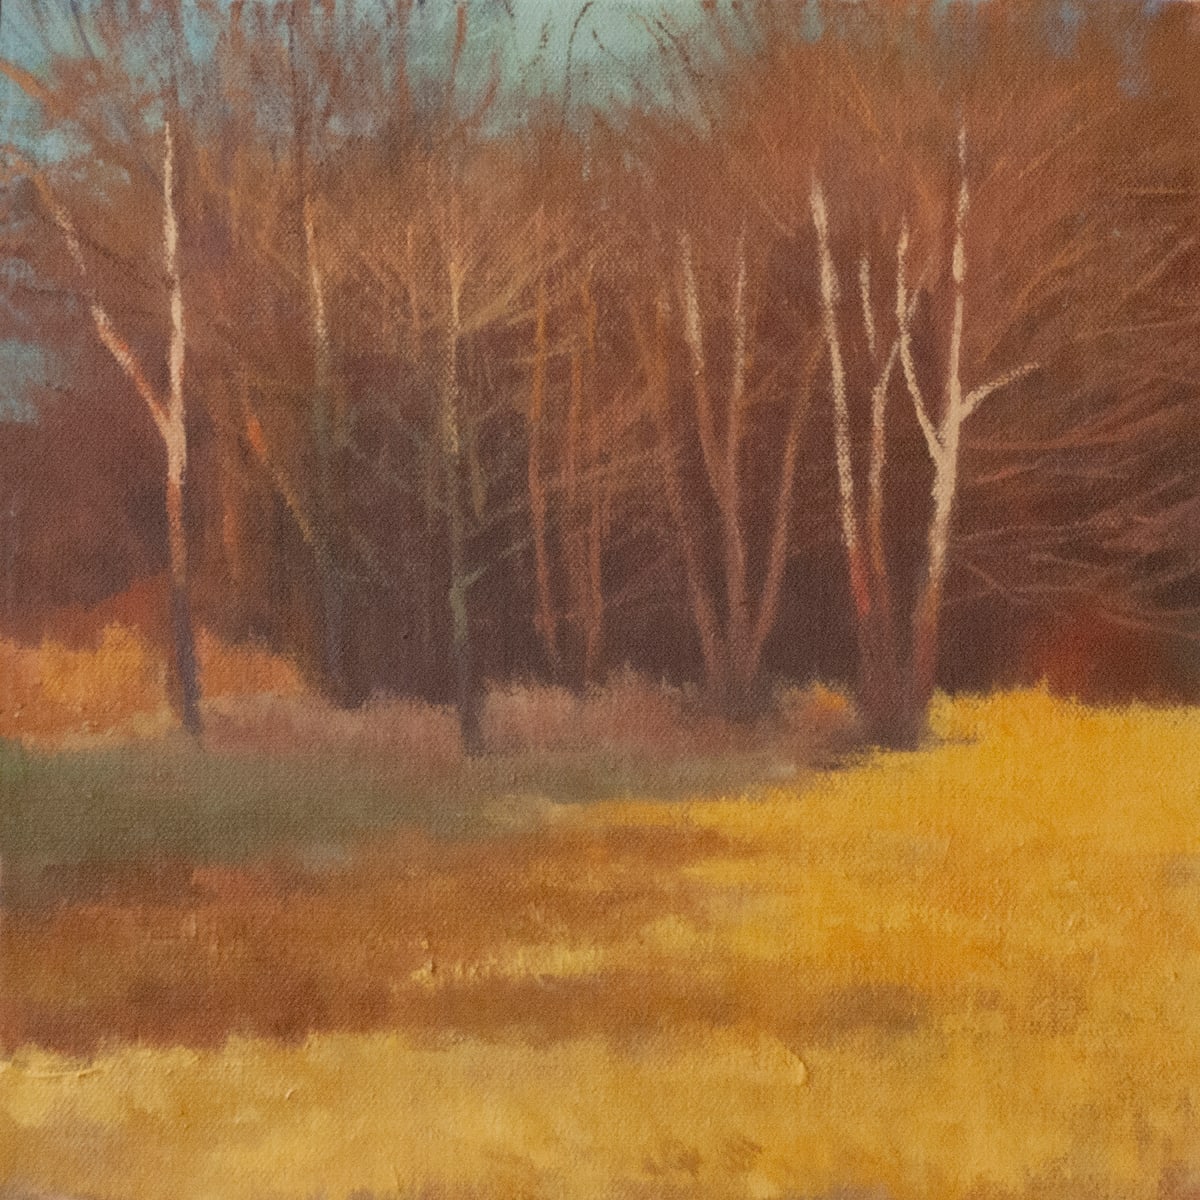 September Evening Light 2, Study, Stroud Series by Gregory Blue 